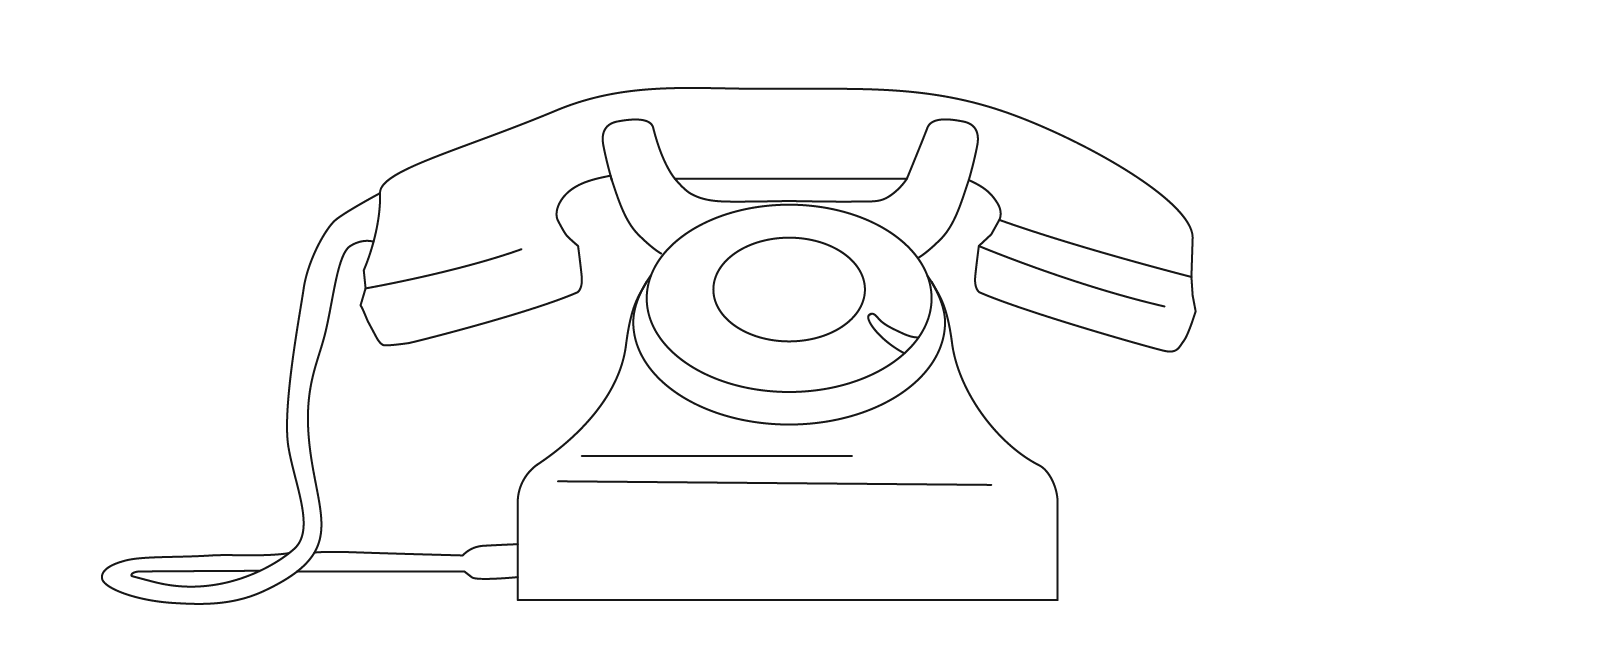 Illustration of an old shool phone